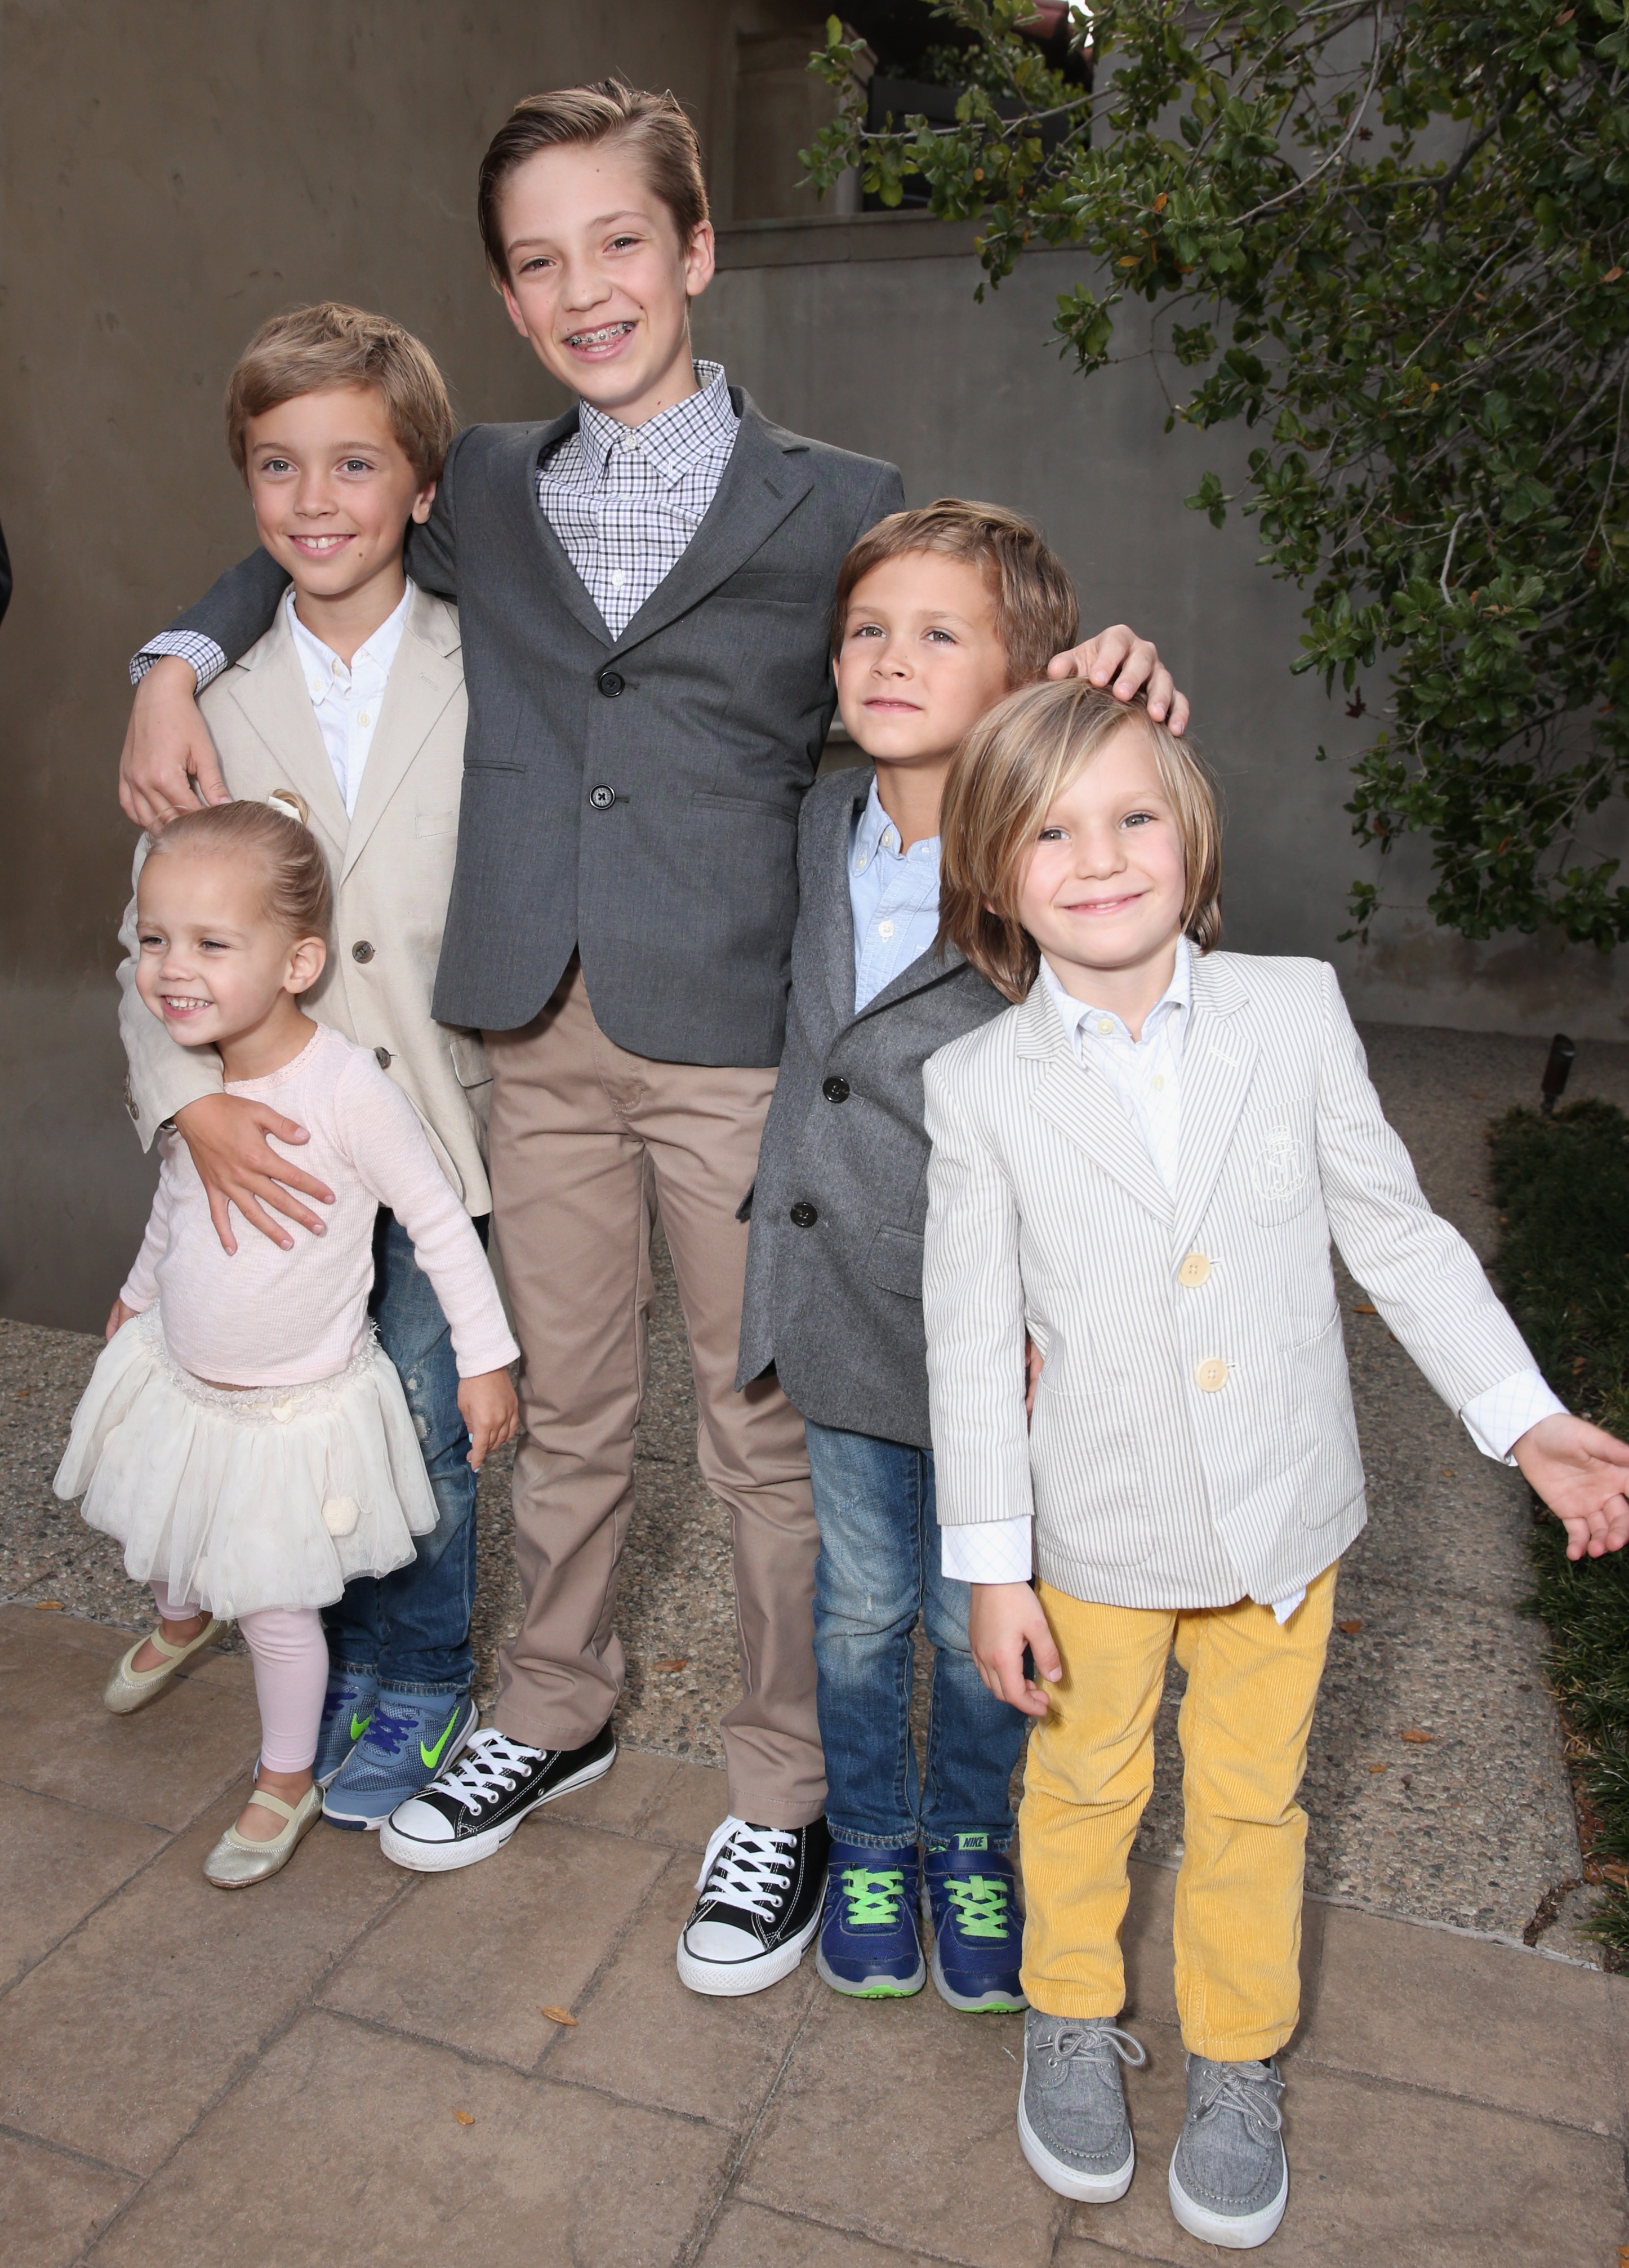 Ryder Robinson, Wilder, Bodhi, and Rio Hudson, as well as Bingham Bellamy attend Goldie Hawn's Annual "Goldie's Love In for Kids" in Beverly Hills, California on May 6, 2016. | Source: Getty Images